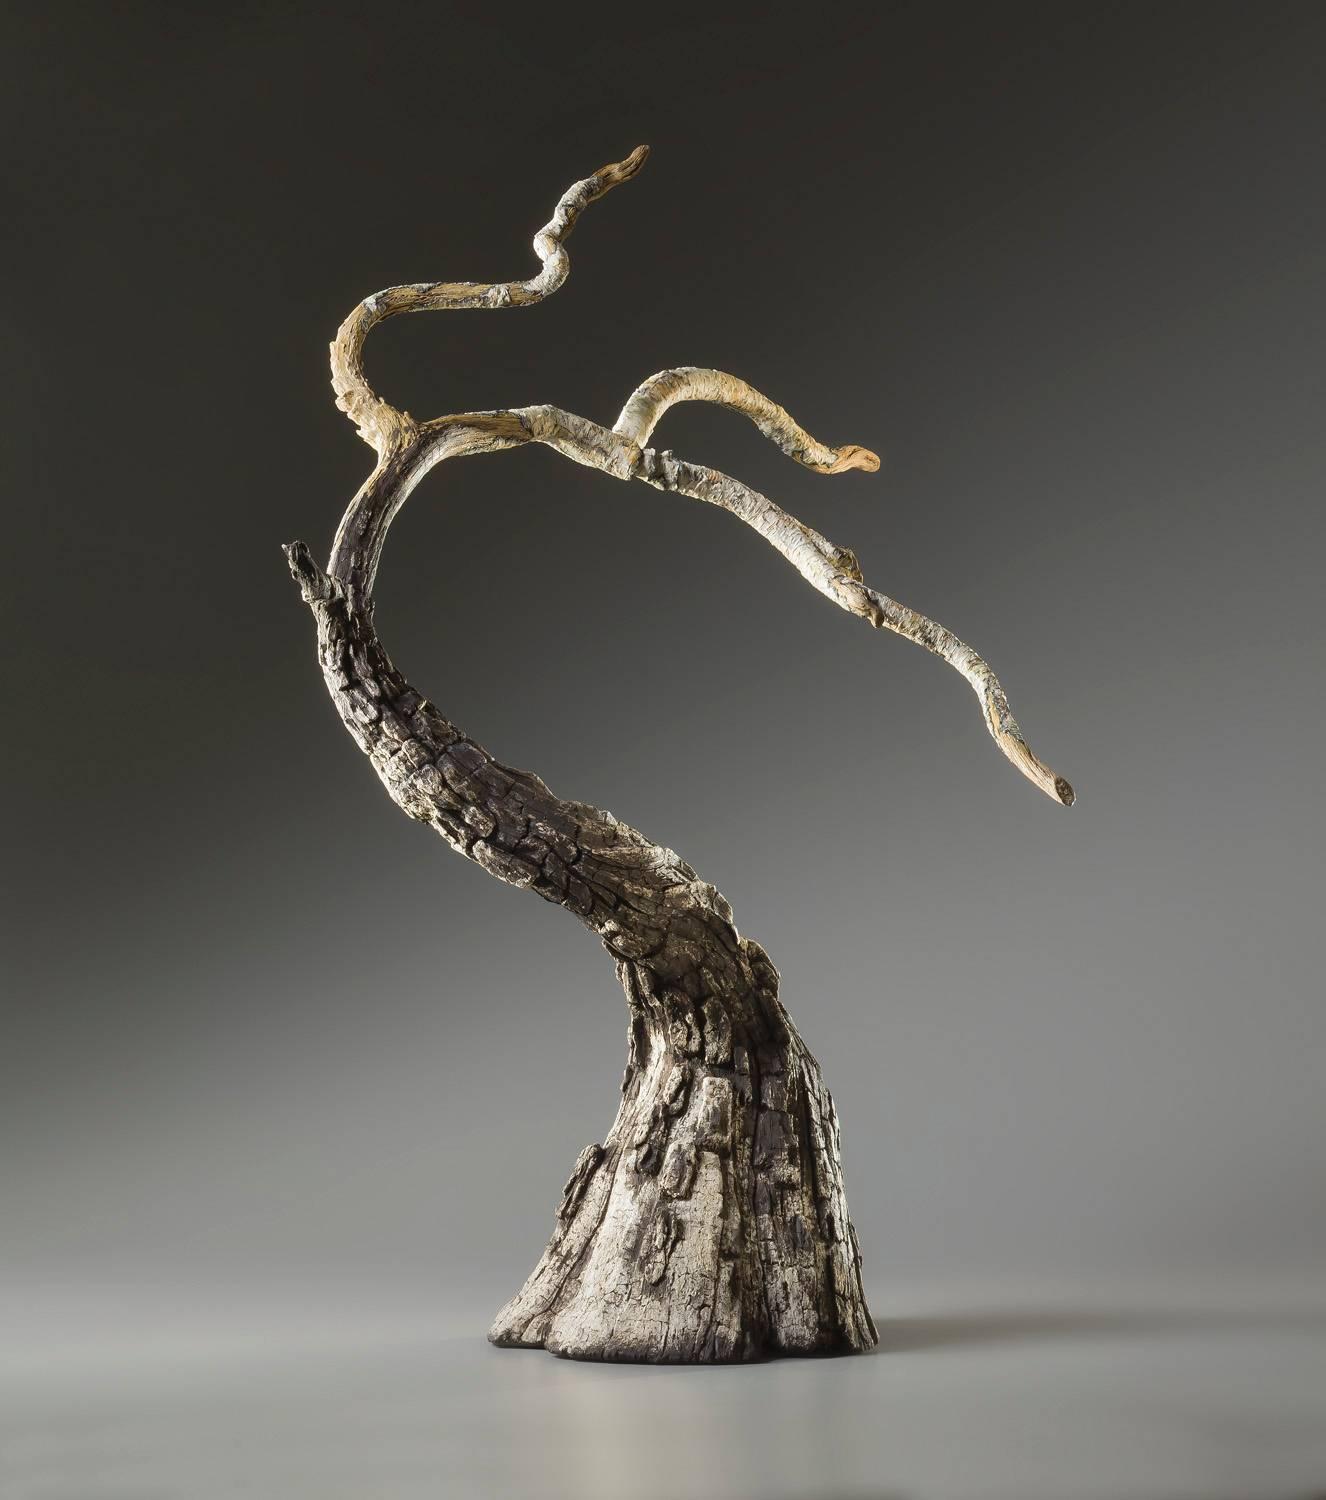 At first glance, it might seem difficult to guess the actual function and medium of this object. Painted with exceptional skill and detail, it appears that Serritella’s Whisper is a sculpture of a dead tree with a burnt trunk. Against all odds,